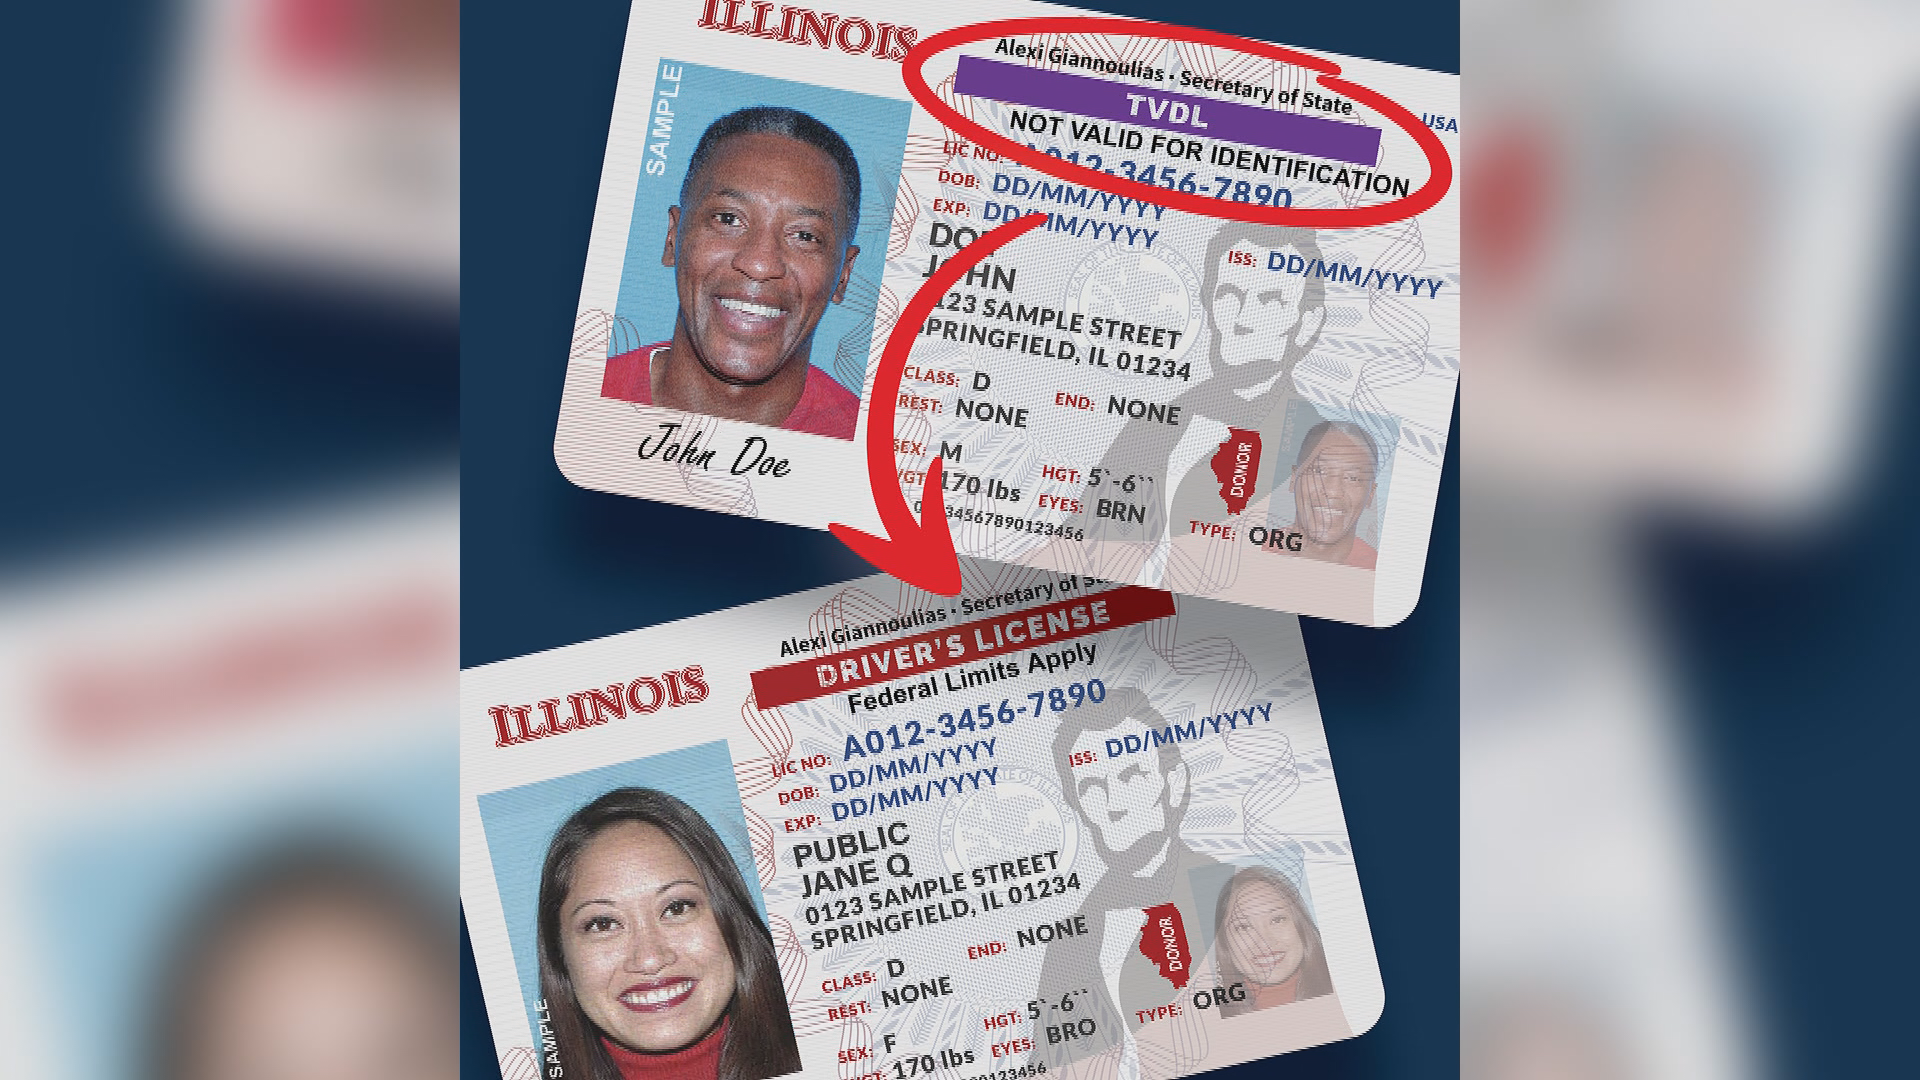 illinois driver's license federal limits apply